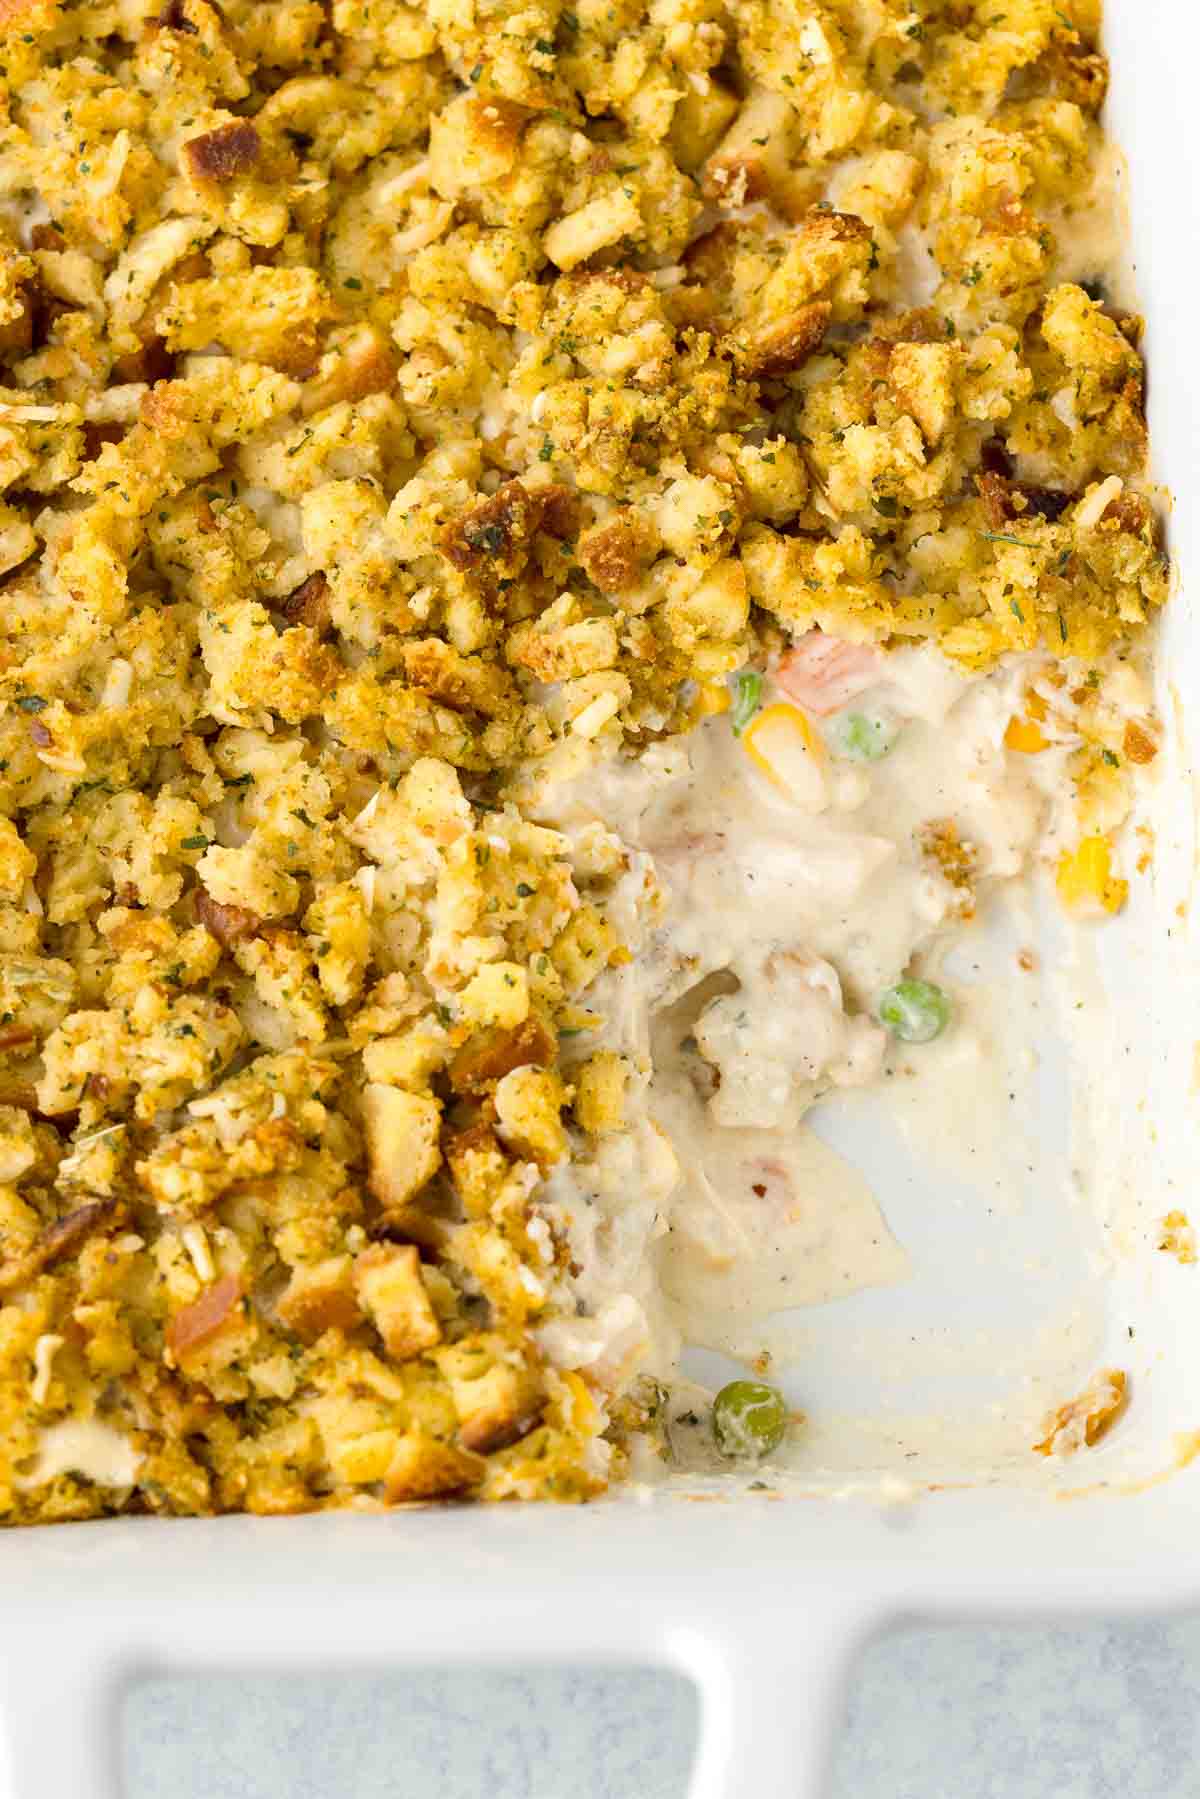 Chicken Stuffing Casserole baked in a casserole dish. The chicken layer is creamy and the stuffing layer is golden.